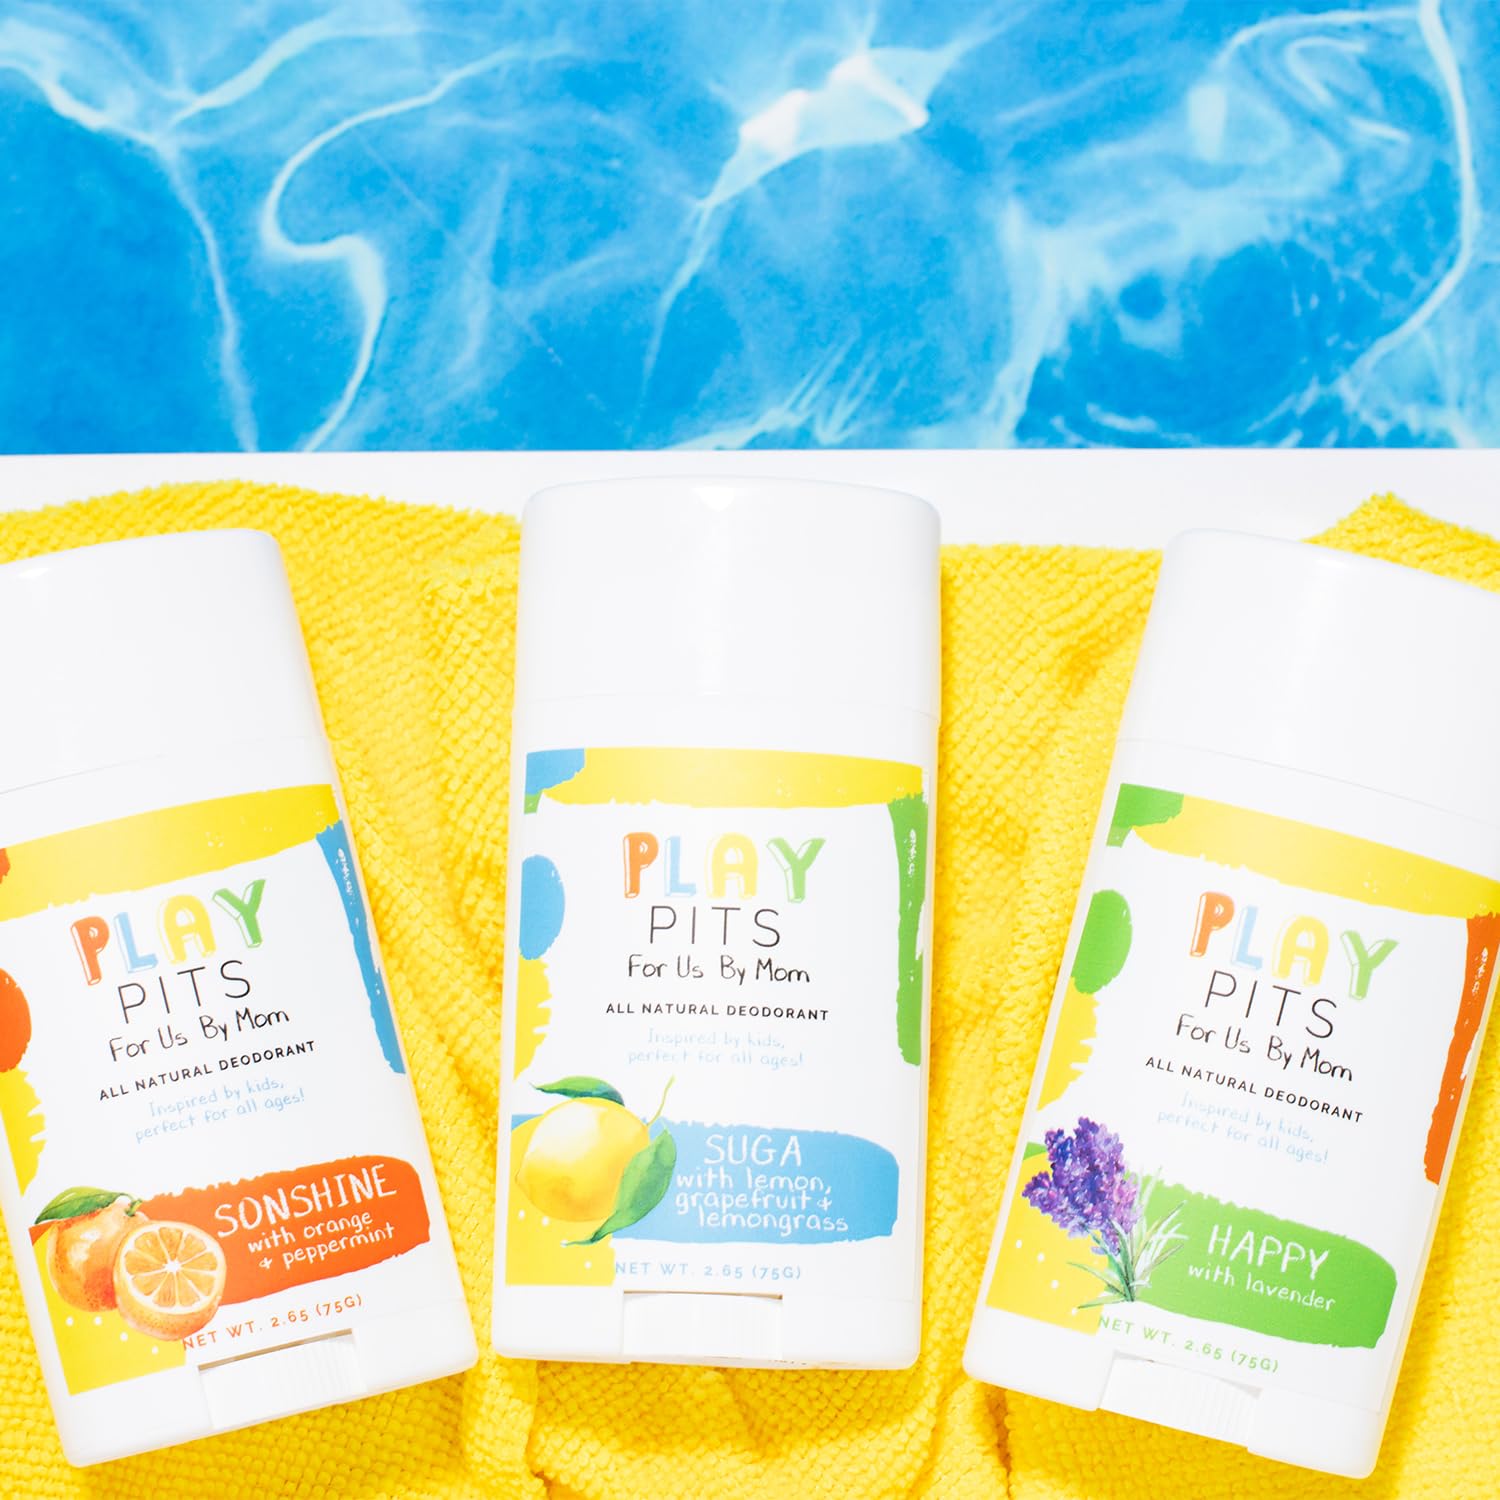 PLAY PITS - Natural Kids Deodorant - Safe for Girls and Boys with Sensitive Skin of All Ages - Aluminum Free - SUGA Scent - Infused with Lemon, Grapefruit, & Lemongrass Essential Oils - 2.65 fl.oz